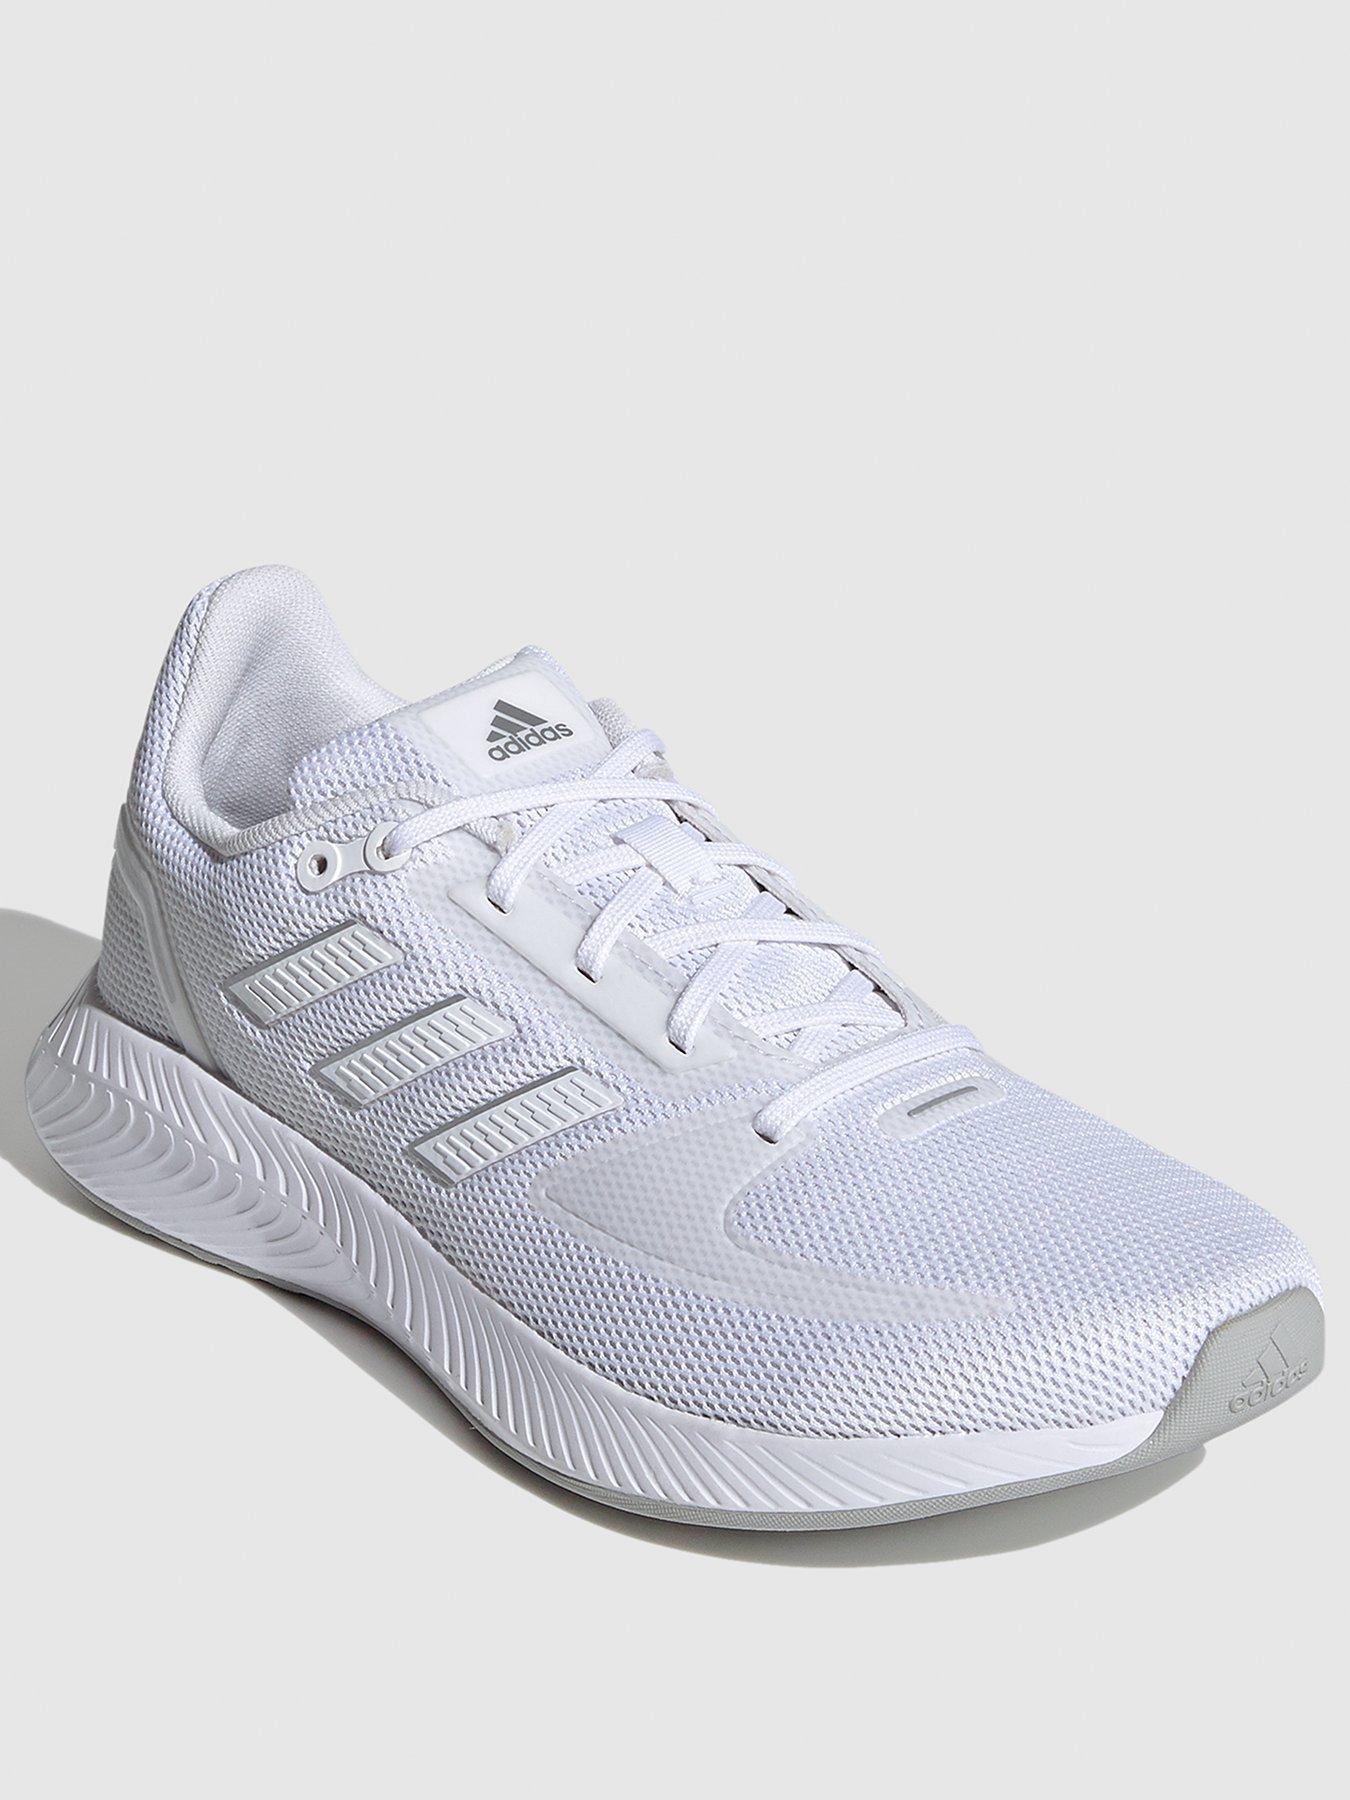 adidas trainers with circles on sole